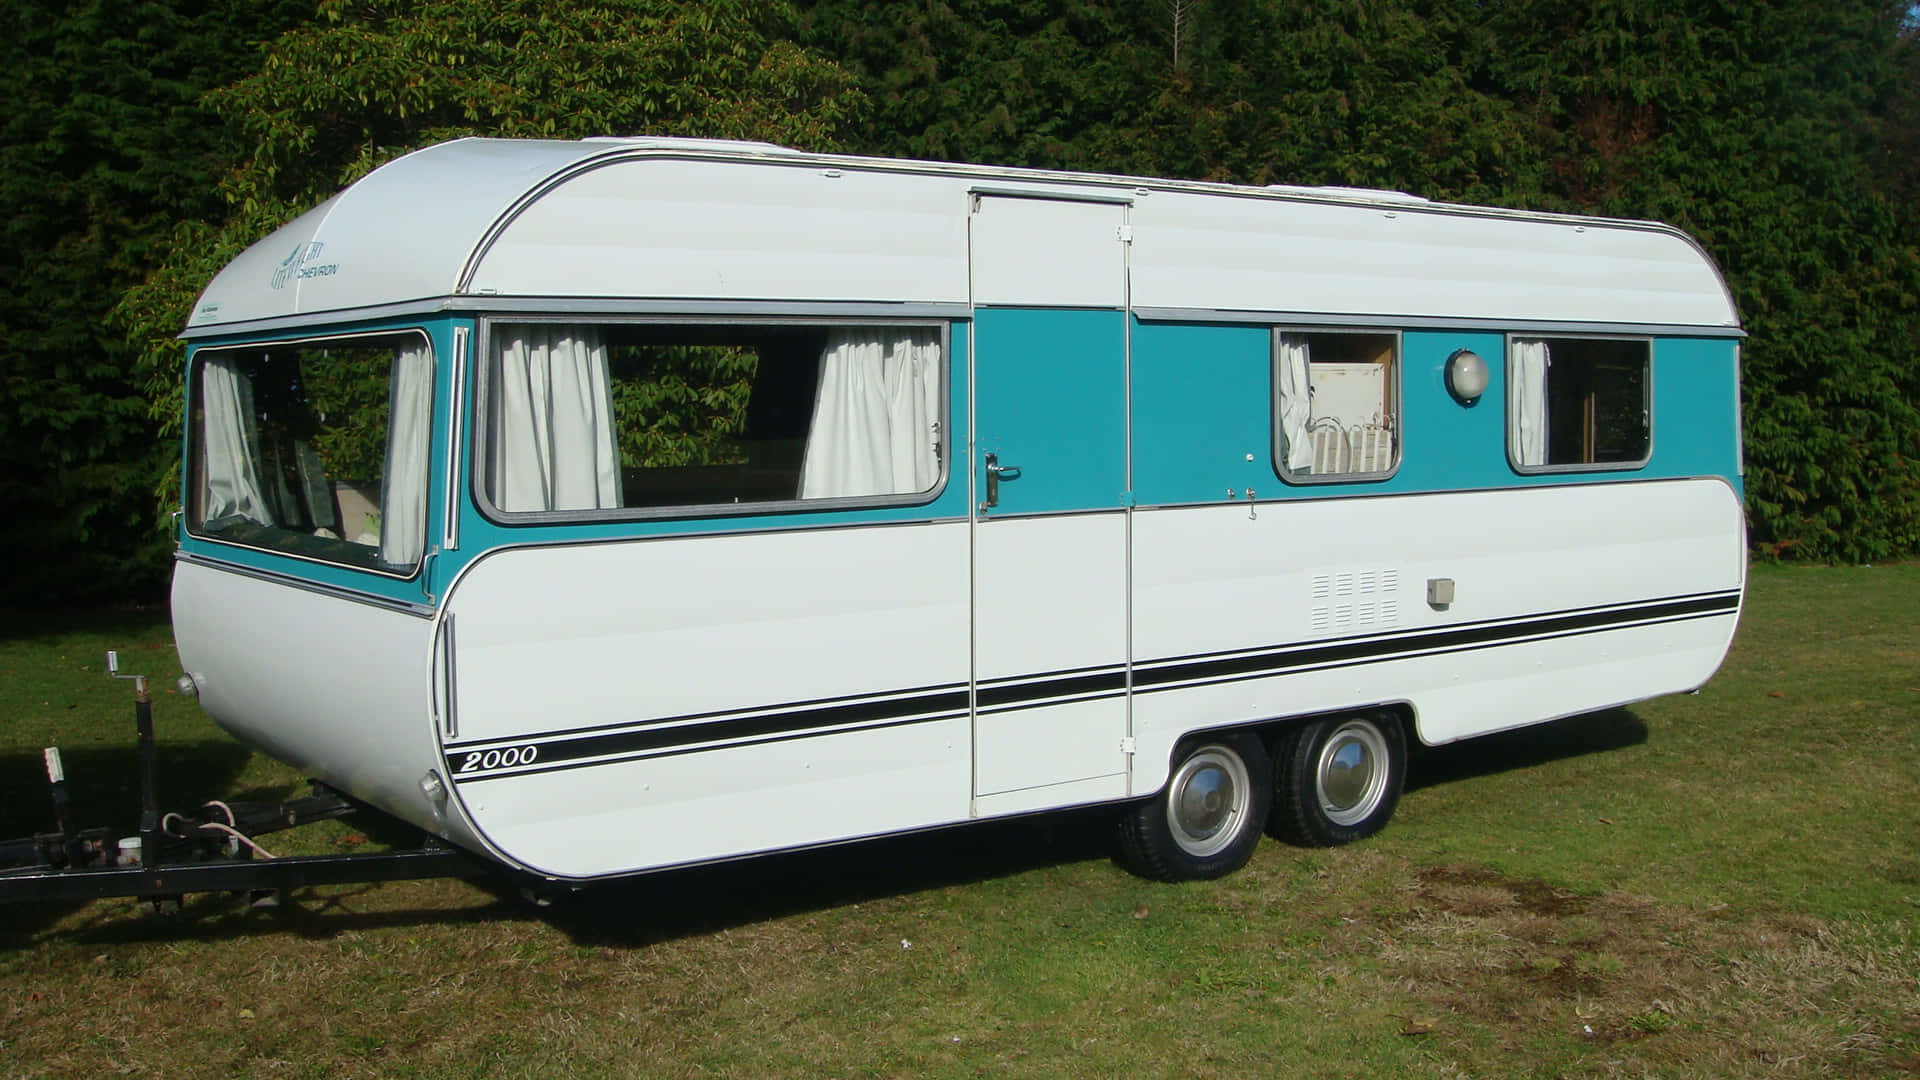 A Small Trailer With A Blue And White Interior